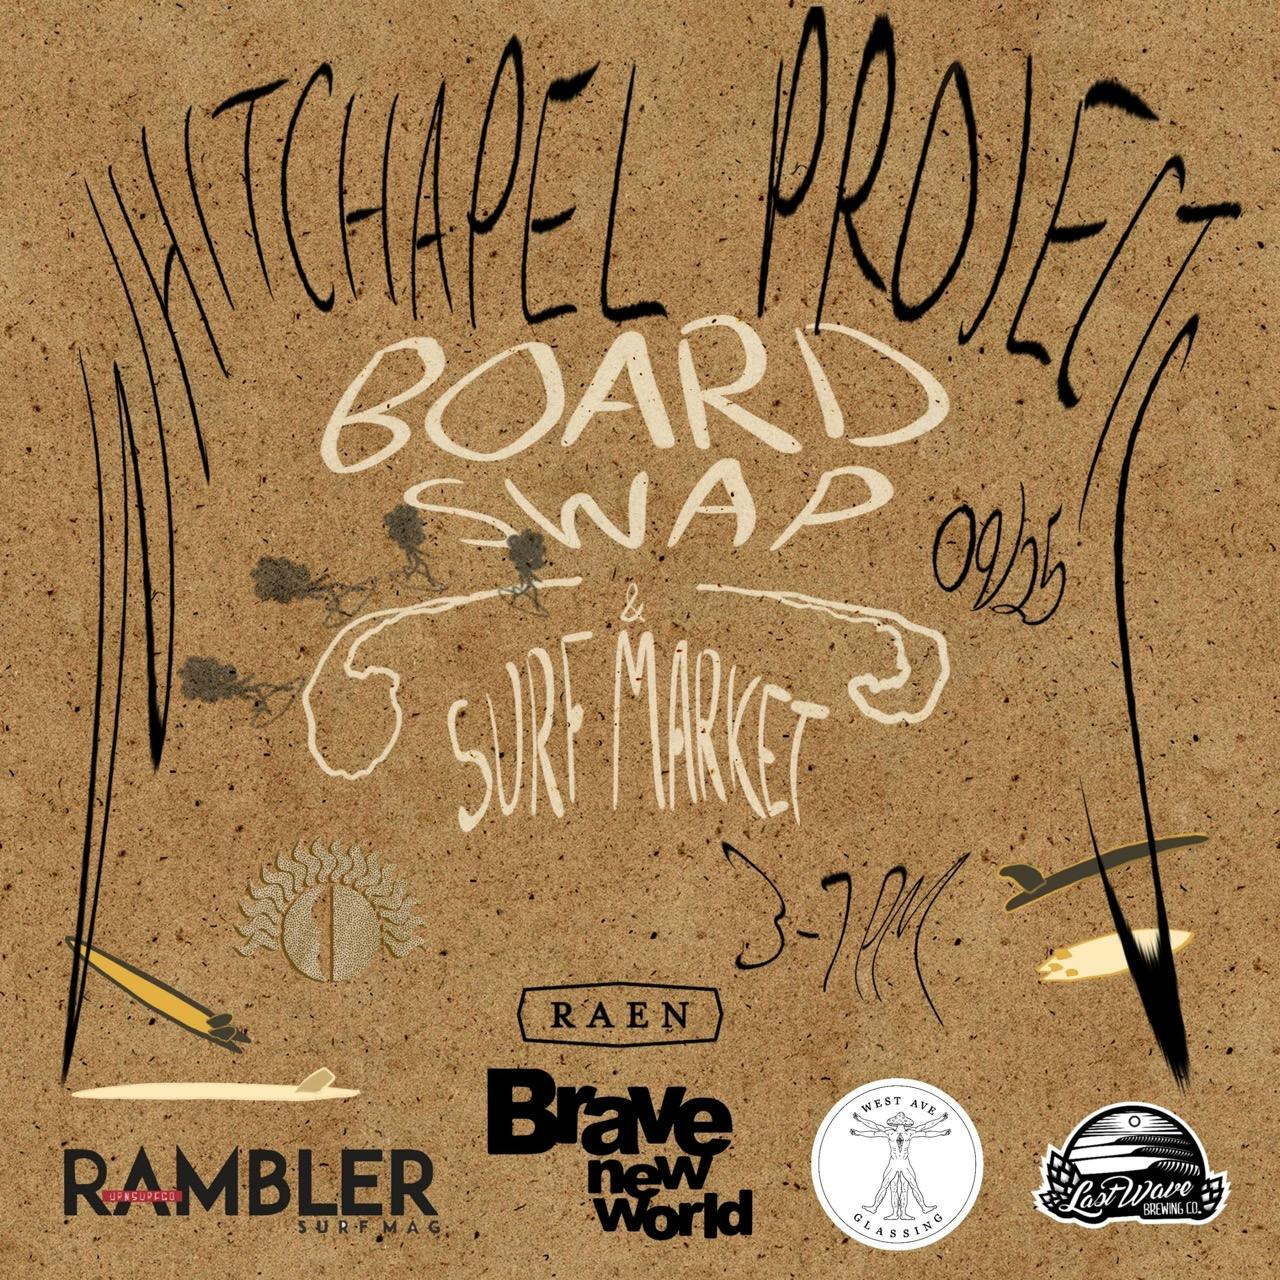 Board Swap and Surf Market Poster